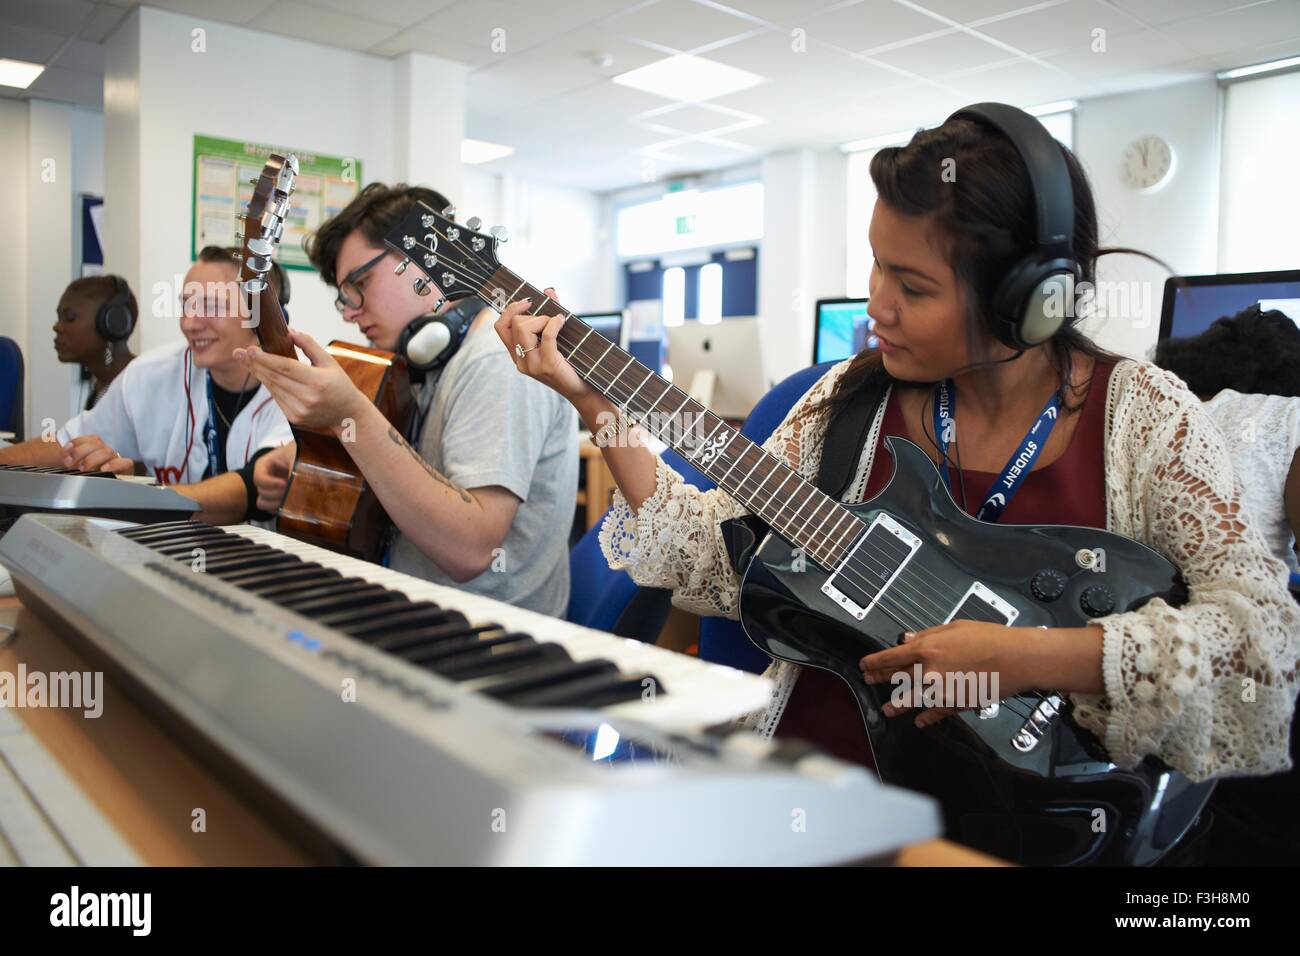 Small group of college students sitting in front of keyboards wearing headphones playing guitars Stock Photo